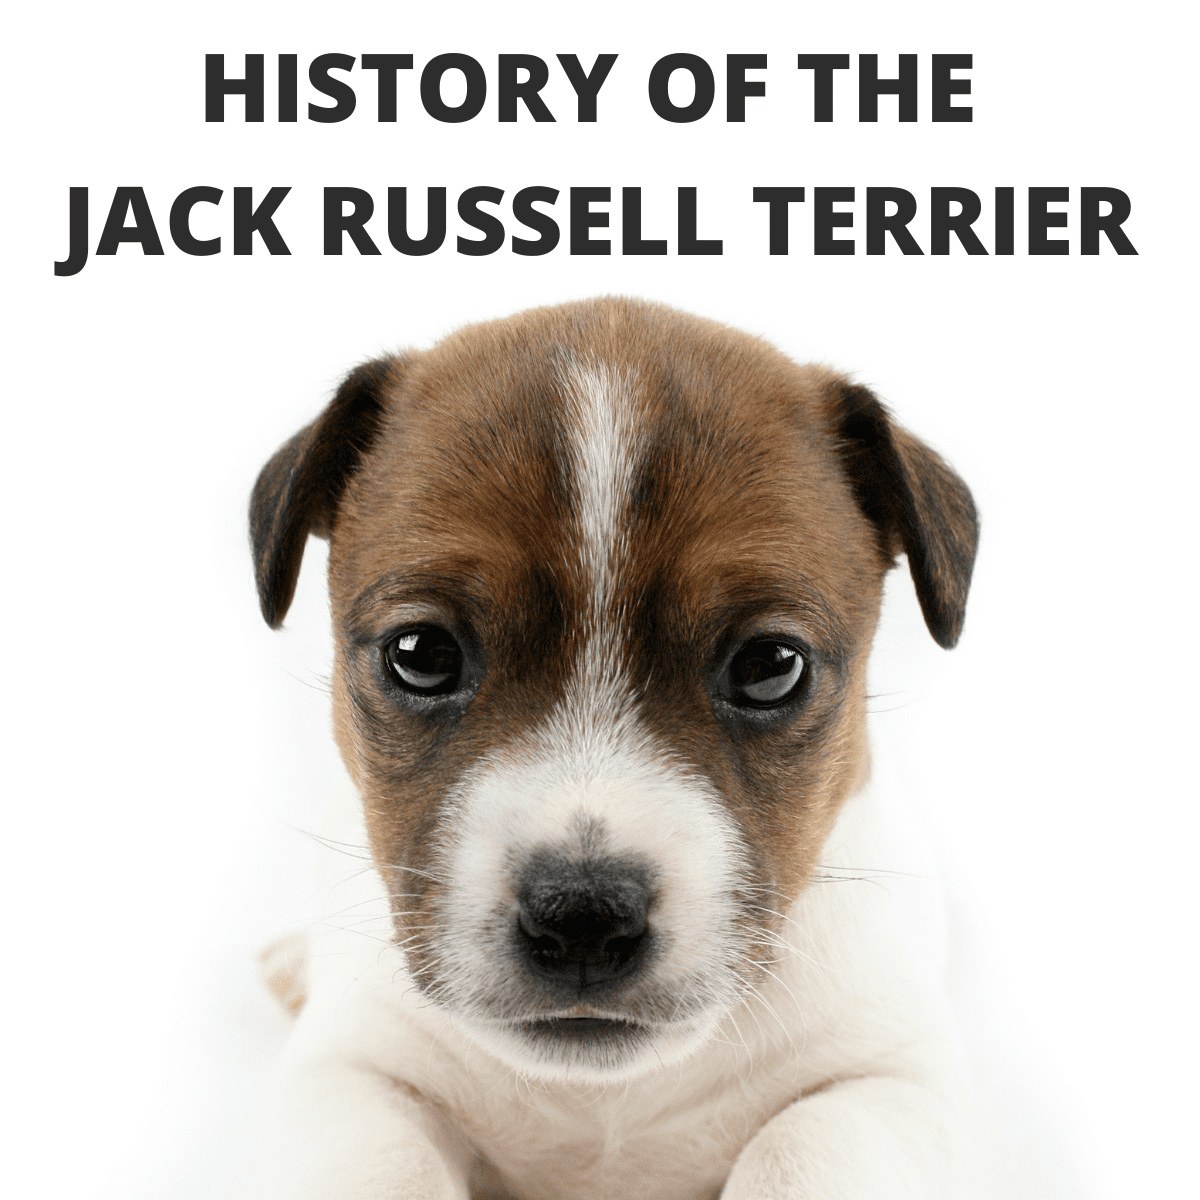 History Of The Jack Russell Terrier Dog Breed (1819 to Modern Day)